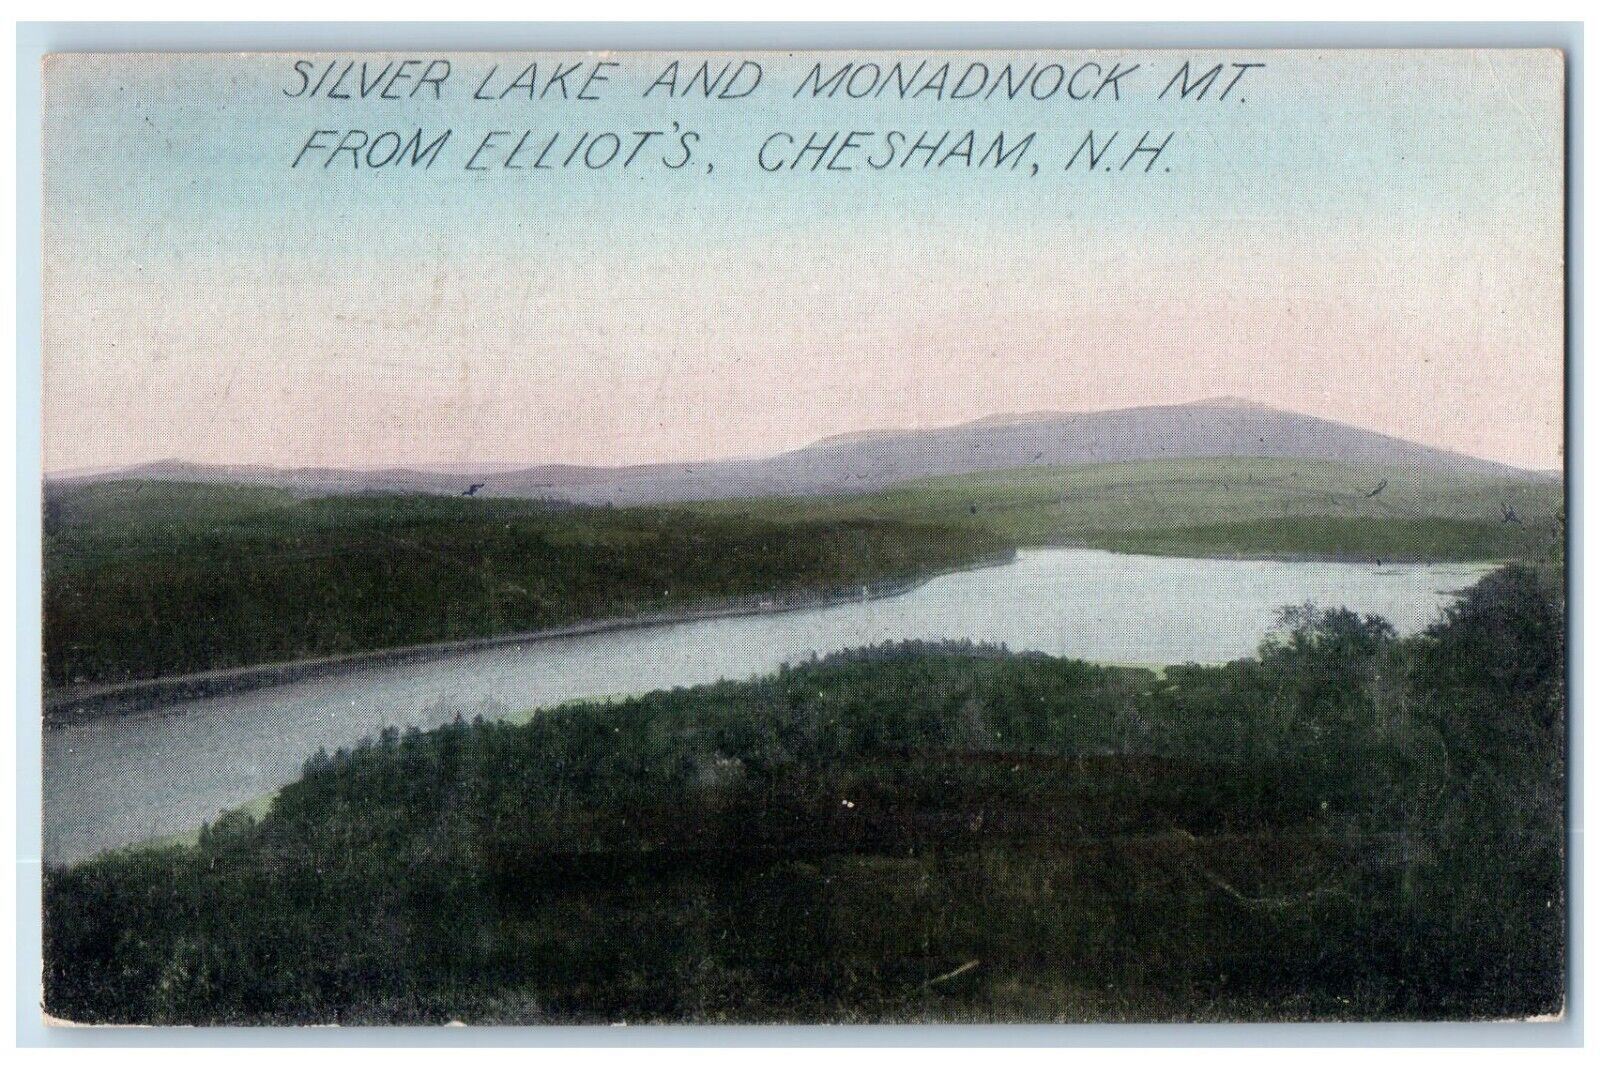 1912 Silver Lake And Monadnock Mt. From Elliot's Chesman NH Antique Postcard